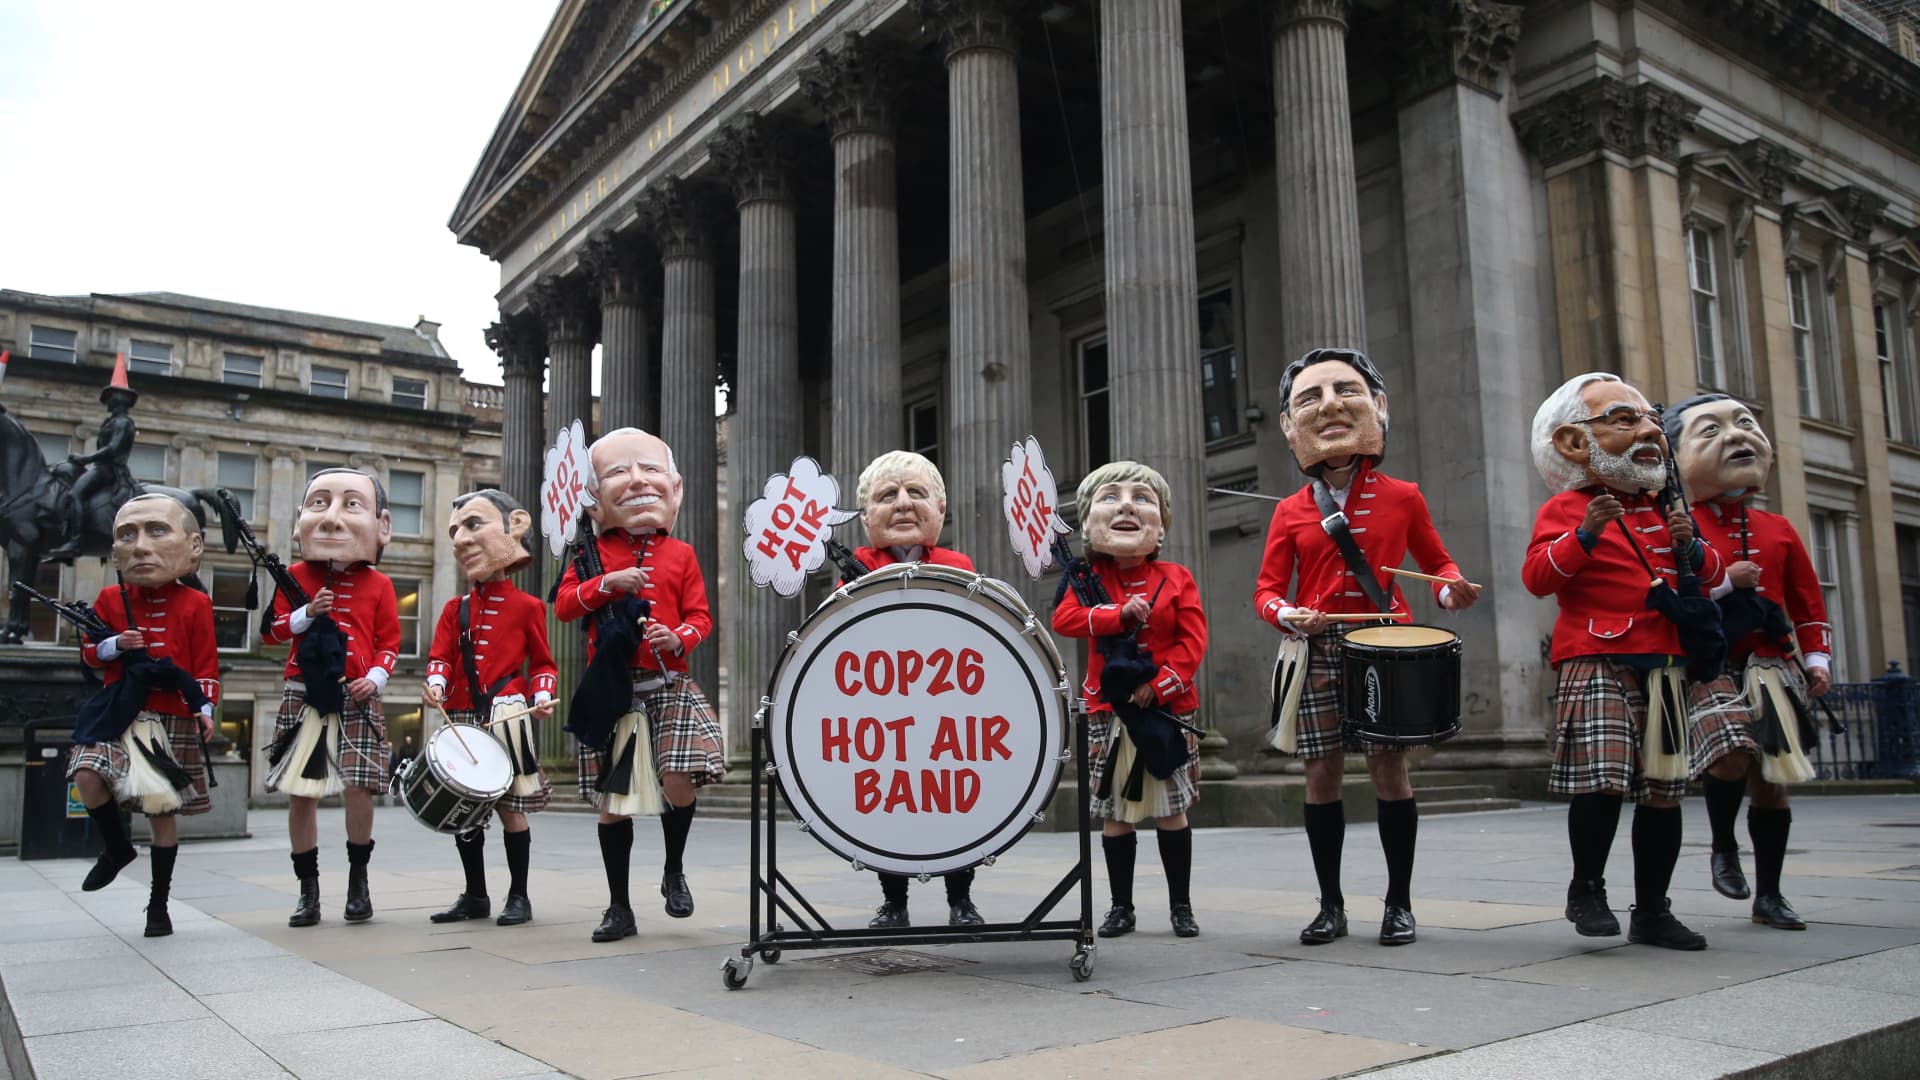 Oxfam activists dressed as world leaders take part in a protest at Royal Exchange Square during the COP26 summit in Glasgow on November 1, 2021.